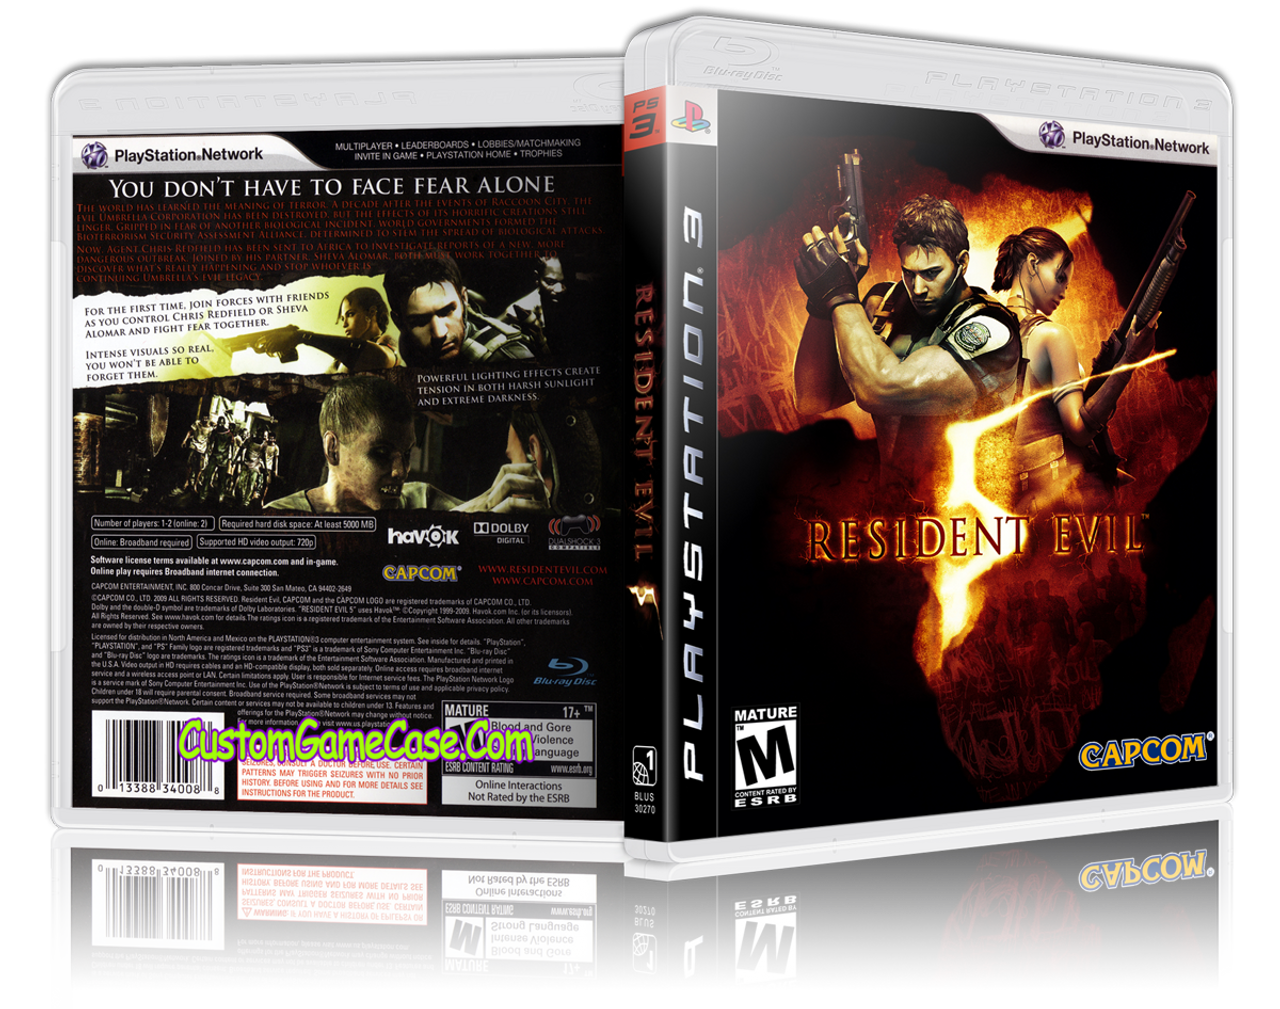 Resident evil 3 ps5. Resident Evil 5 ps3. Resident Evil 5 ps3 обложка. Resident Evil 8 ps5 диск. Residence ps3.